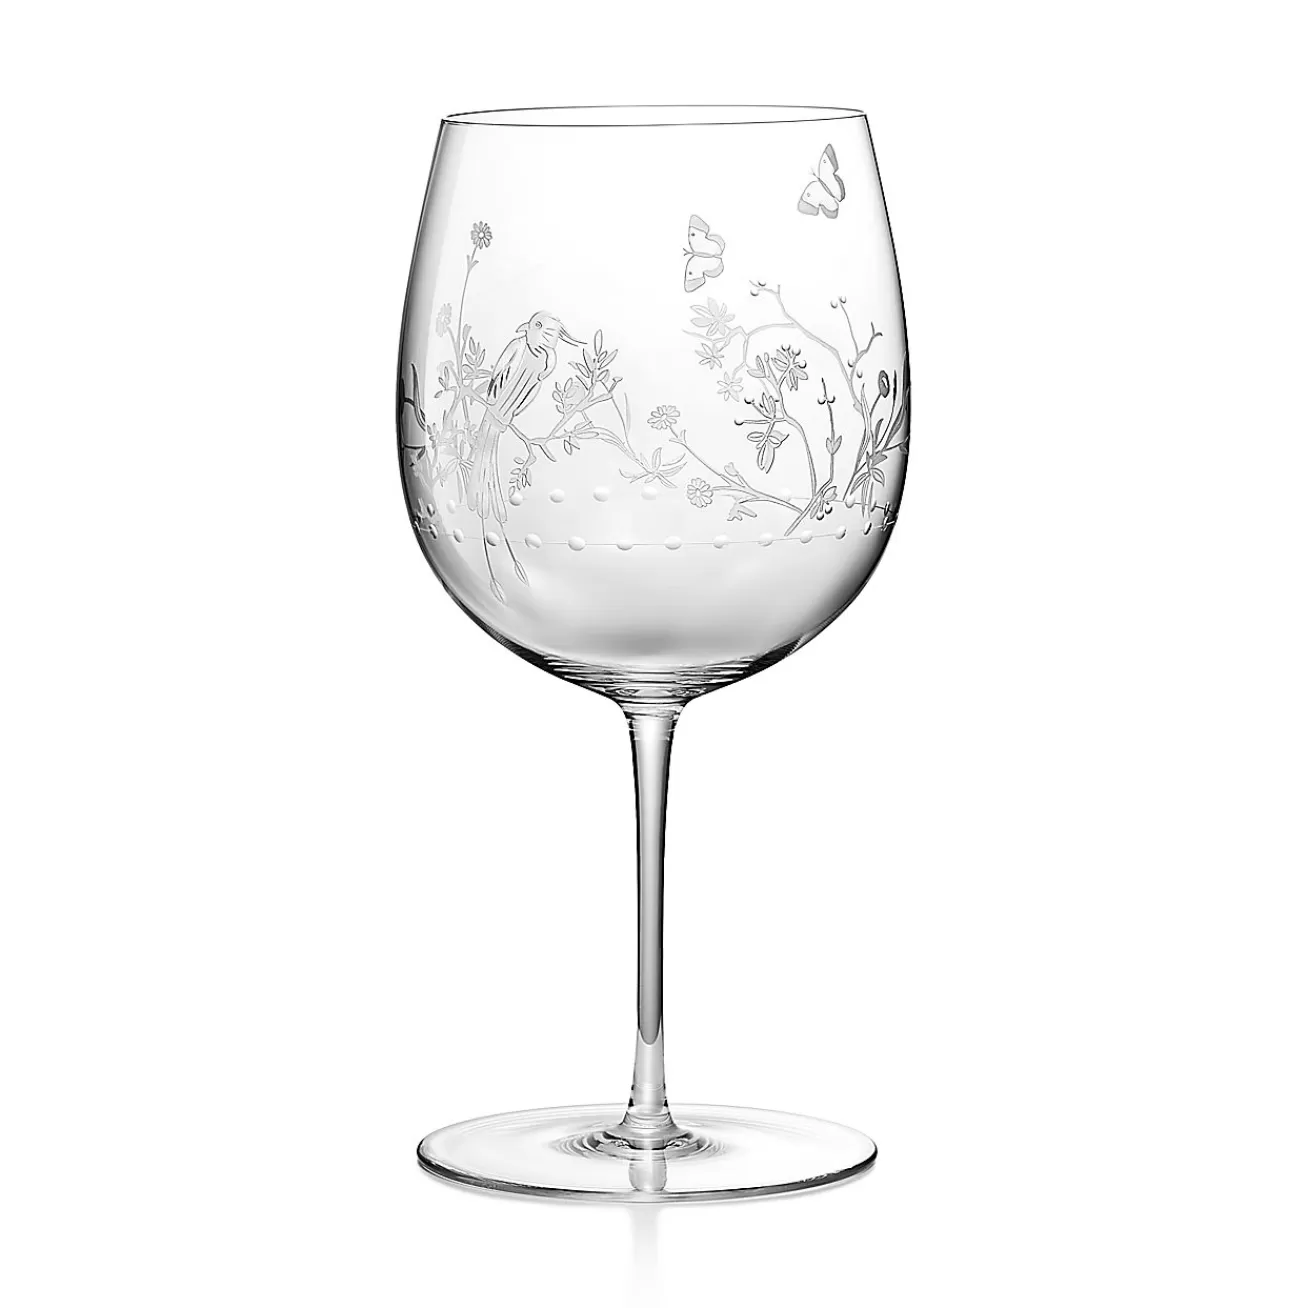 Tiffany & Co. Tiffany Jardin Red Wine Glass in Hand-etched Glass | ^ The Couple | Wedding Gifts